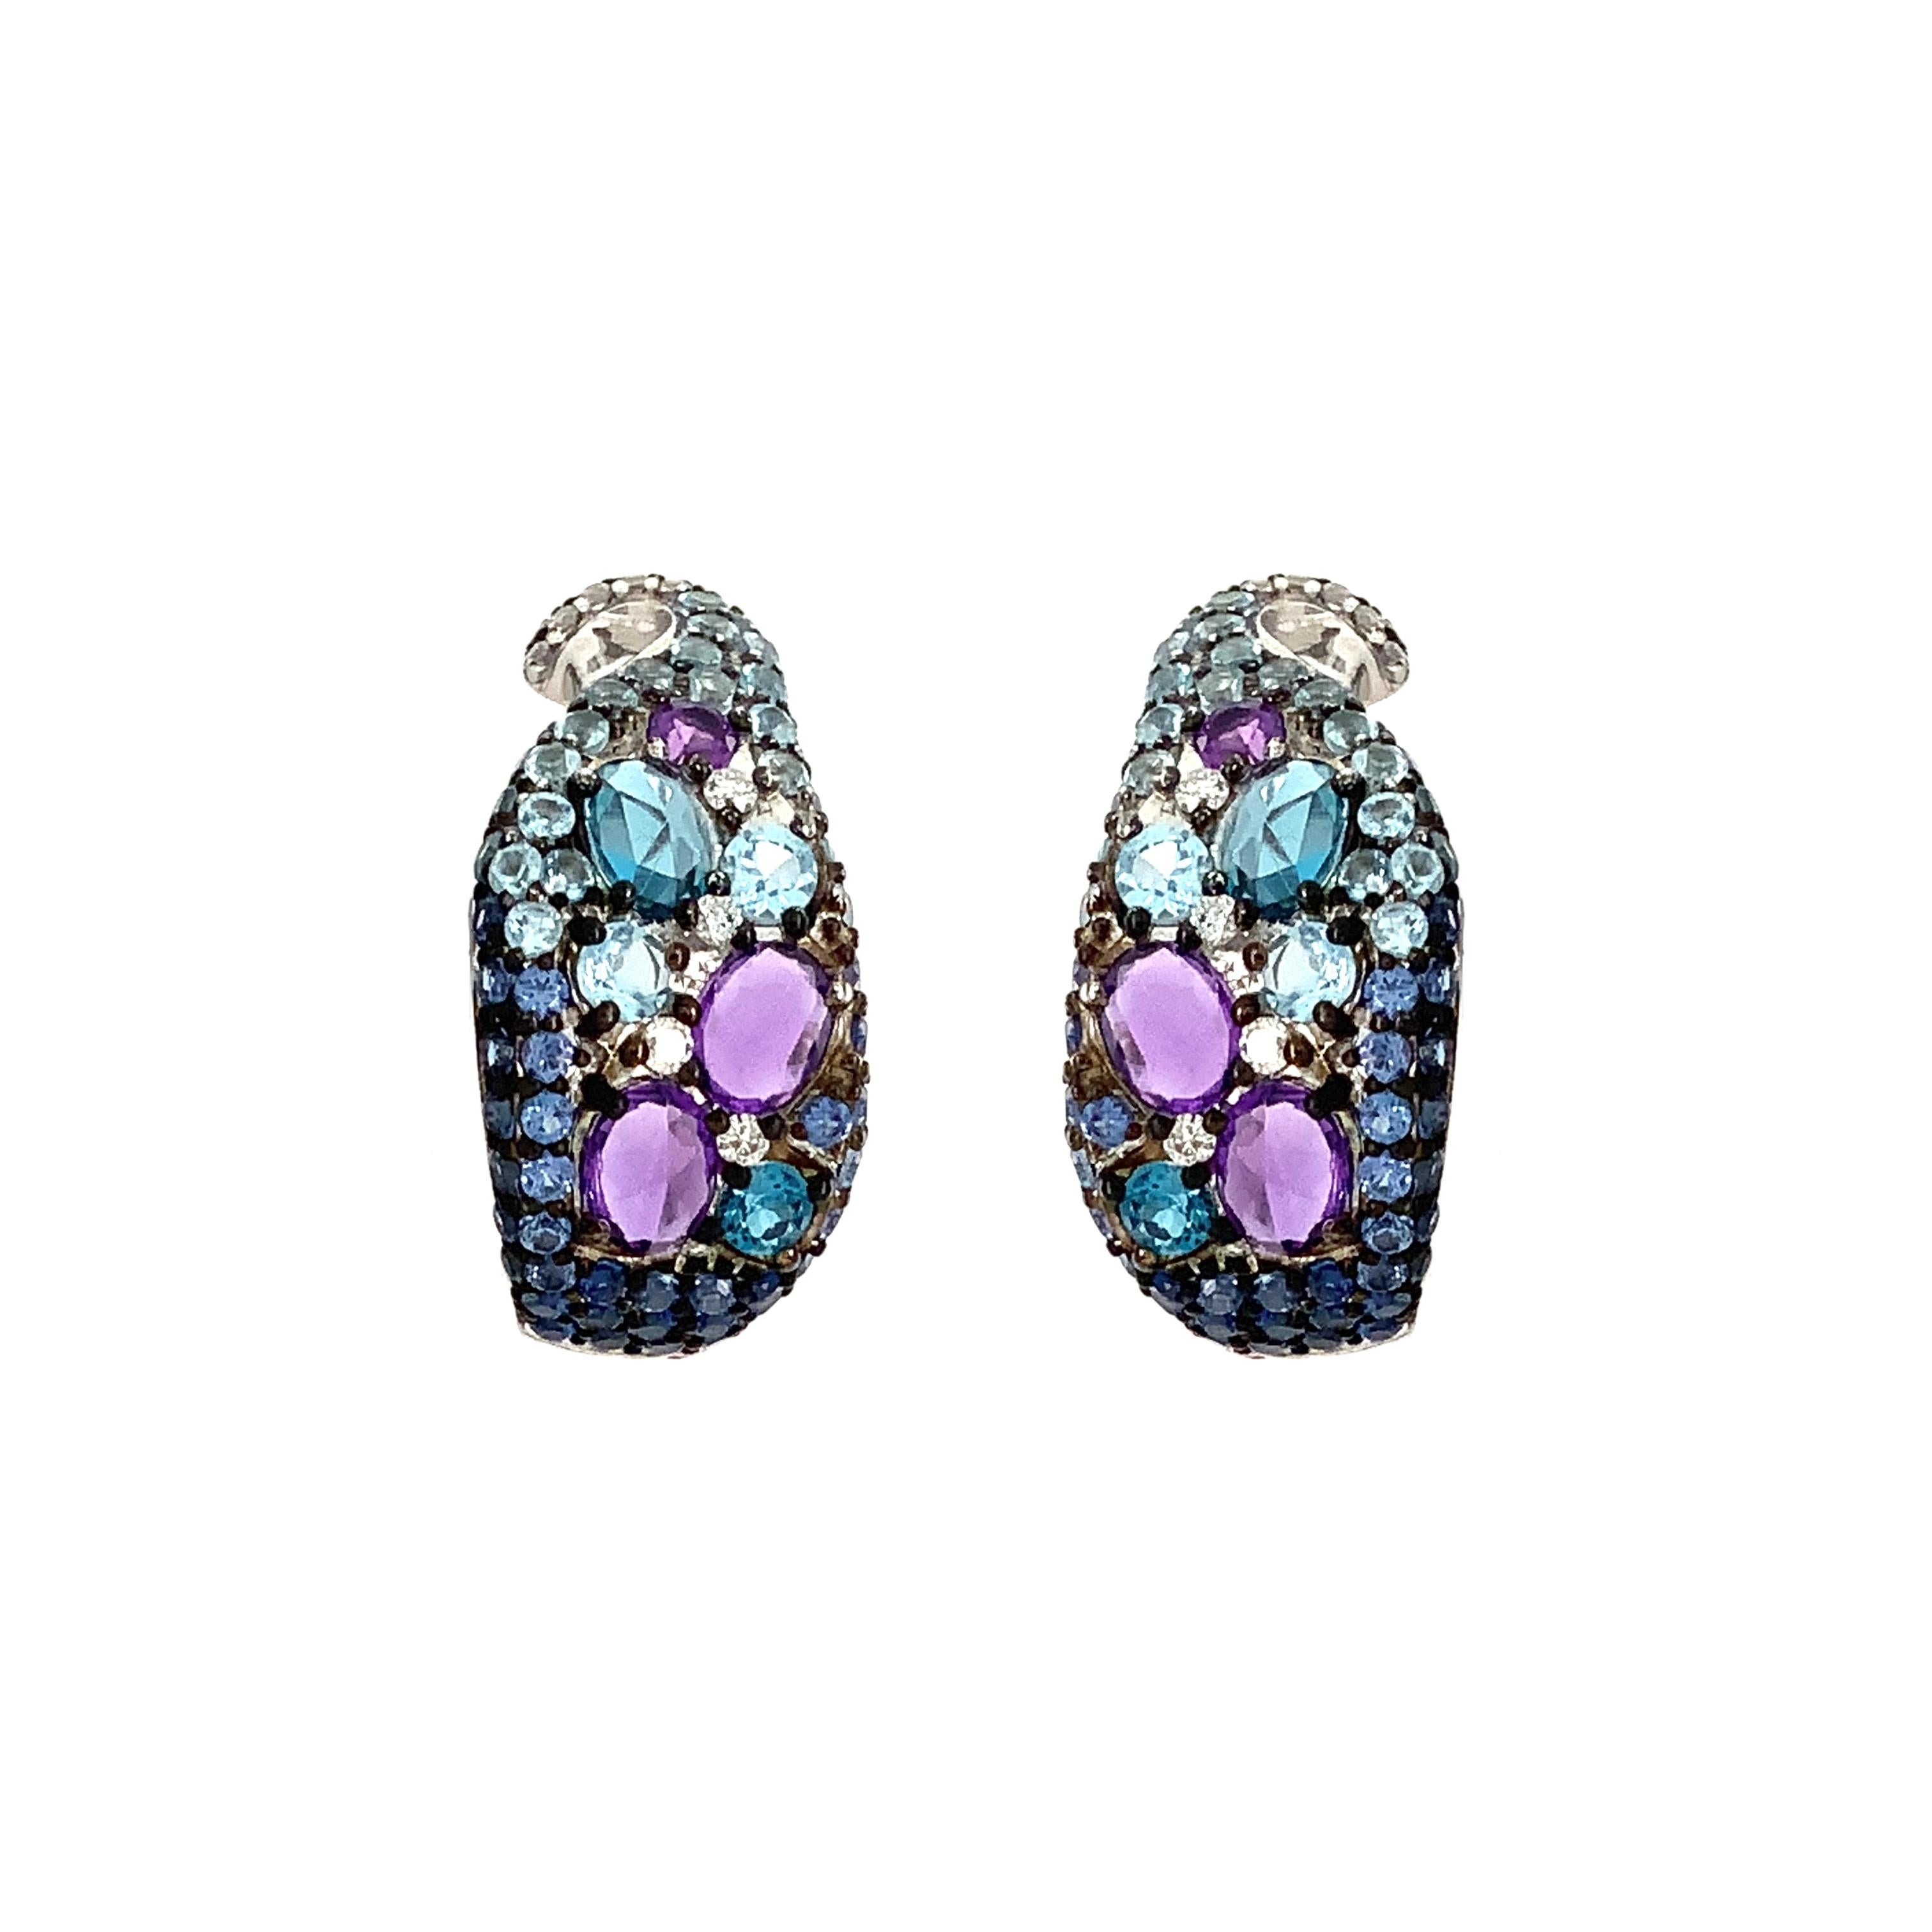 These elegant ASBA Collection Earrings have a striking Ombre pattern of Sapphires, Amethysts, Blue Topaz, and Diamonds, all set in 14K White Gold. The Sapphires total 0.70 ctw, Amethysts 0.60 ctw, and Blue Topaz 0.30 ctw, while the Diamonds come to